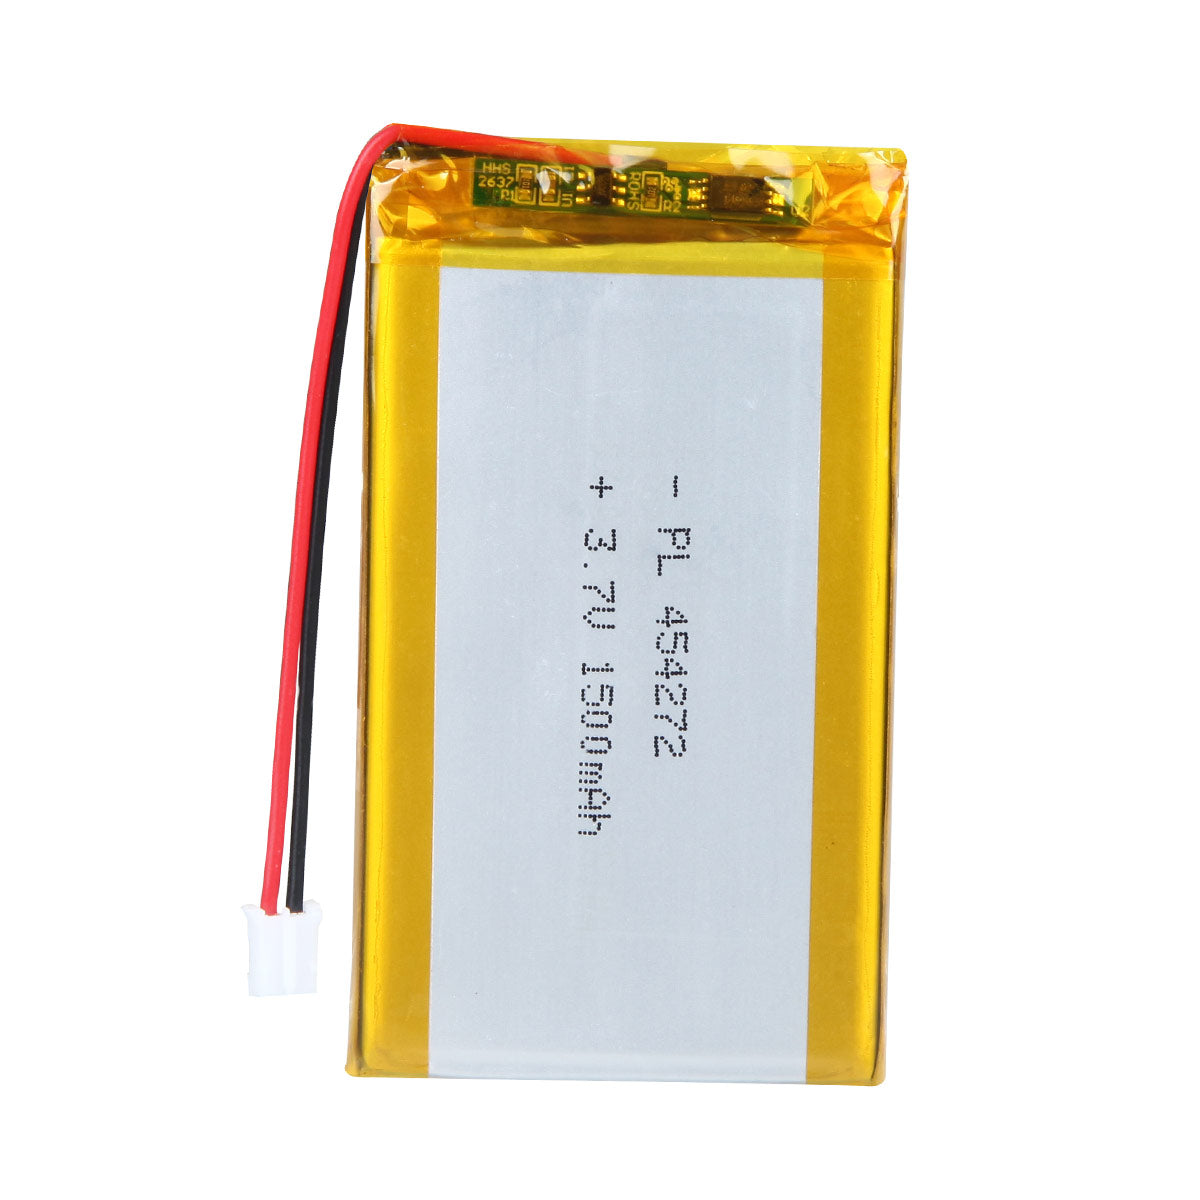 YDL 3.7V 1500mAh 454272 Rechargeable Lithium Polymer Battery Length 74mm